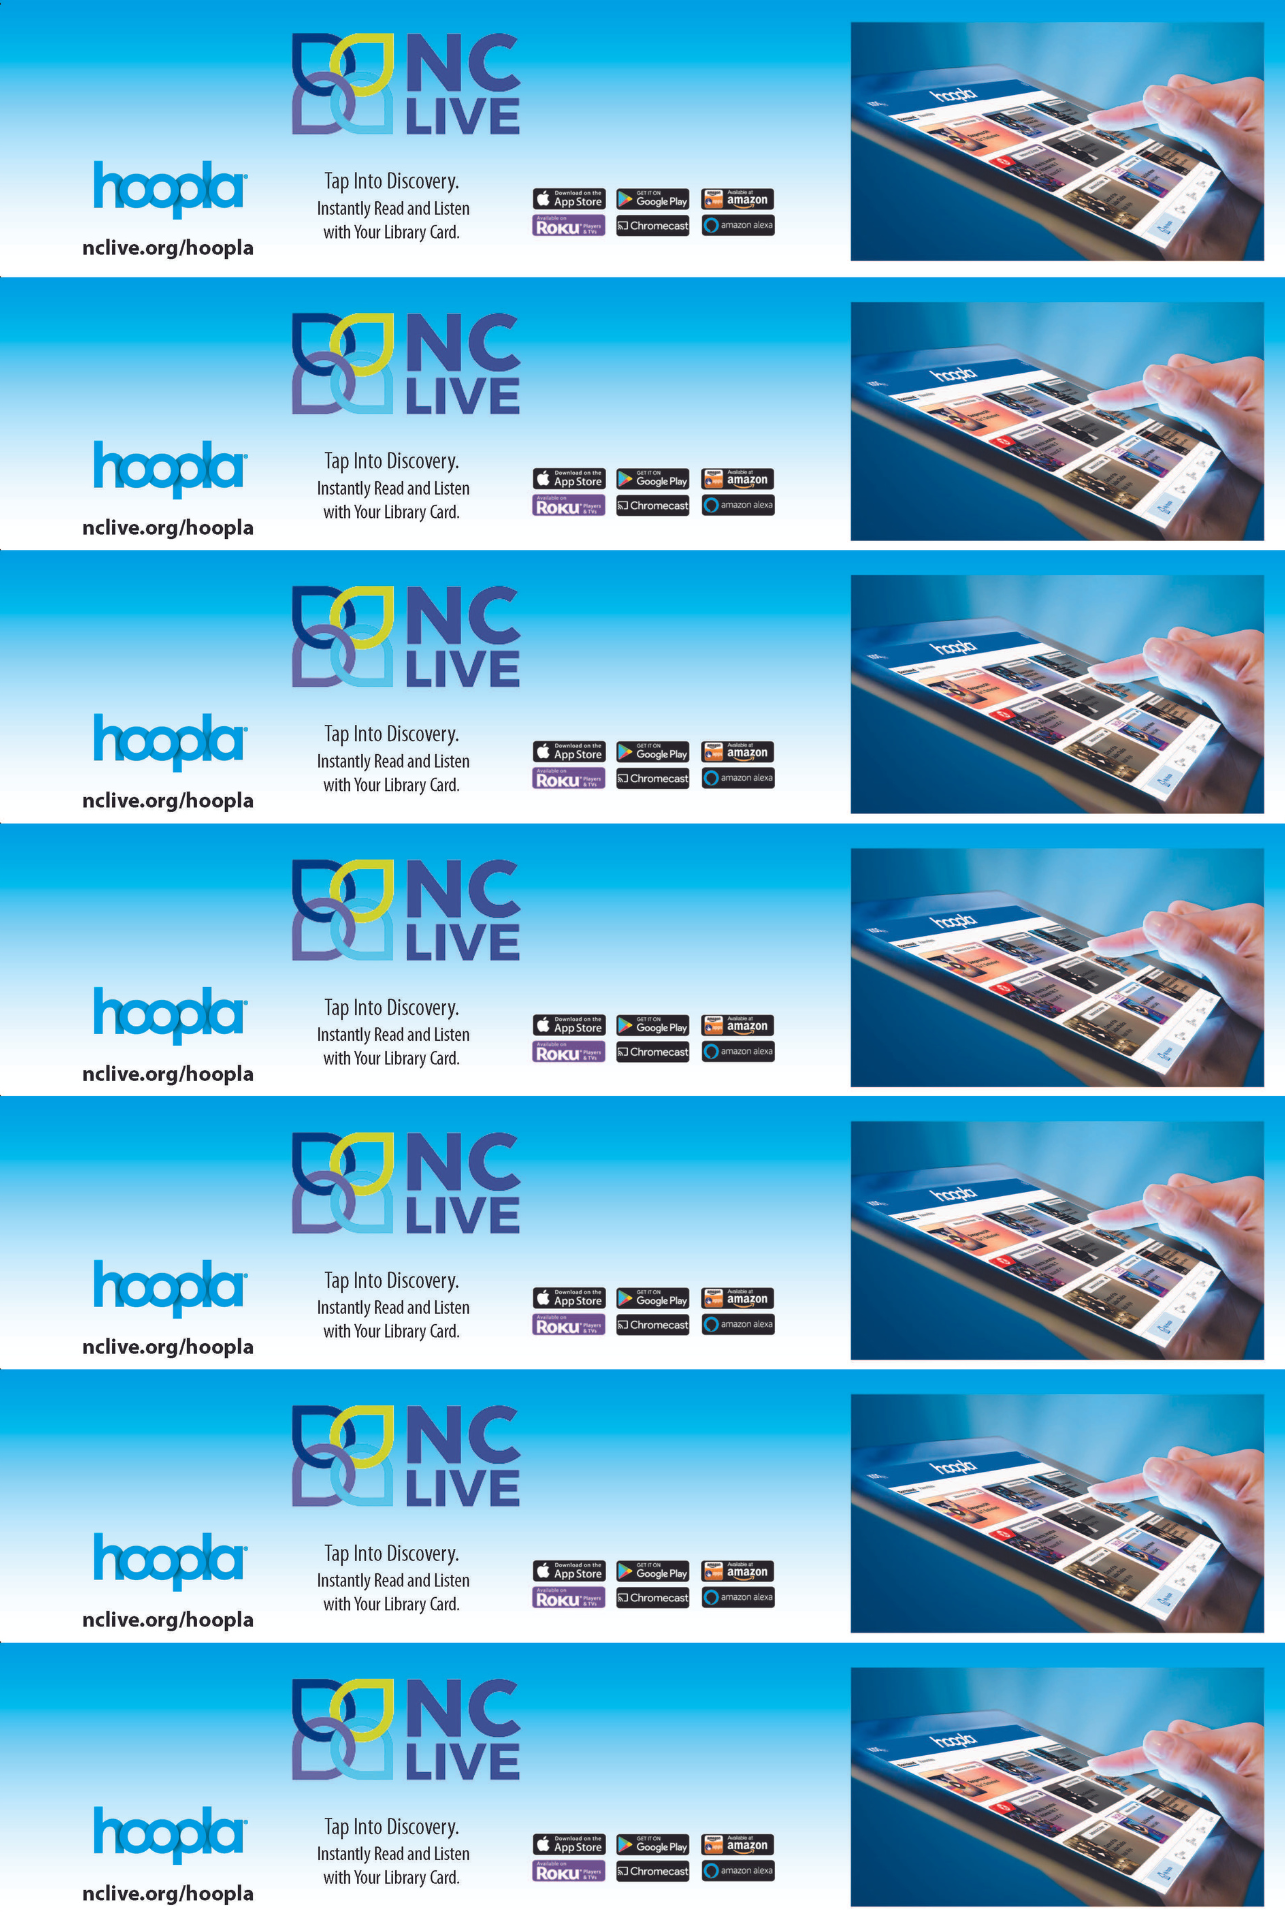 Seven blue bookmarks with the hoopla and NC LIVE logos.